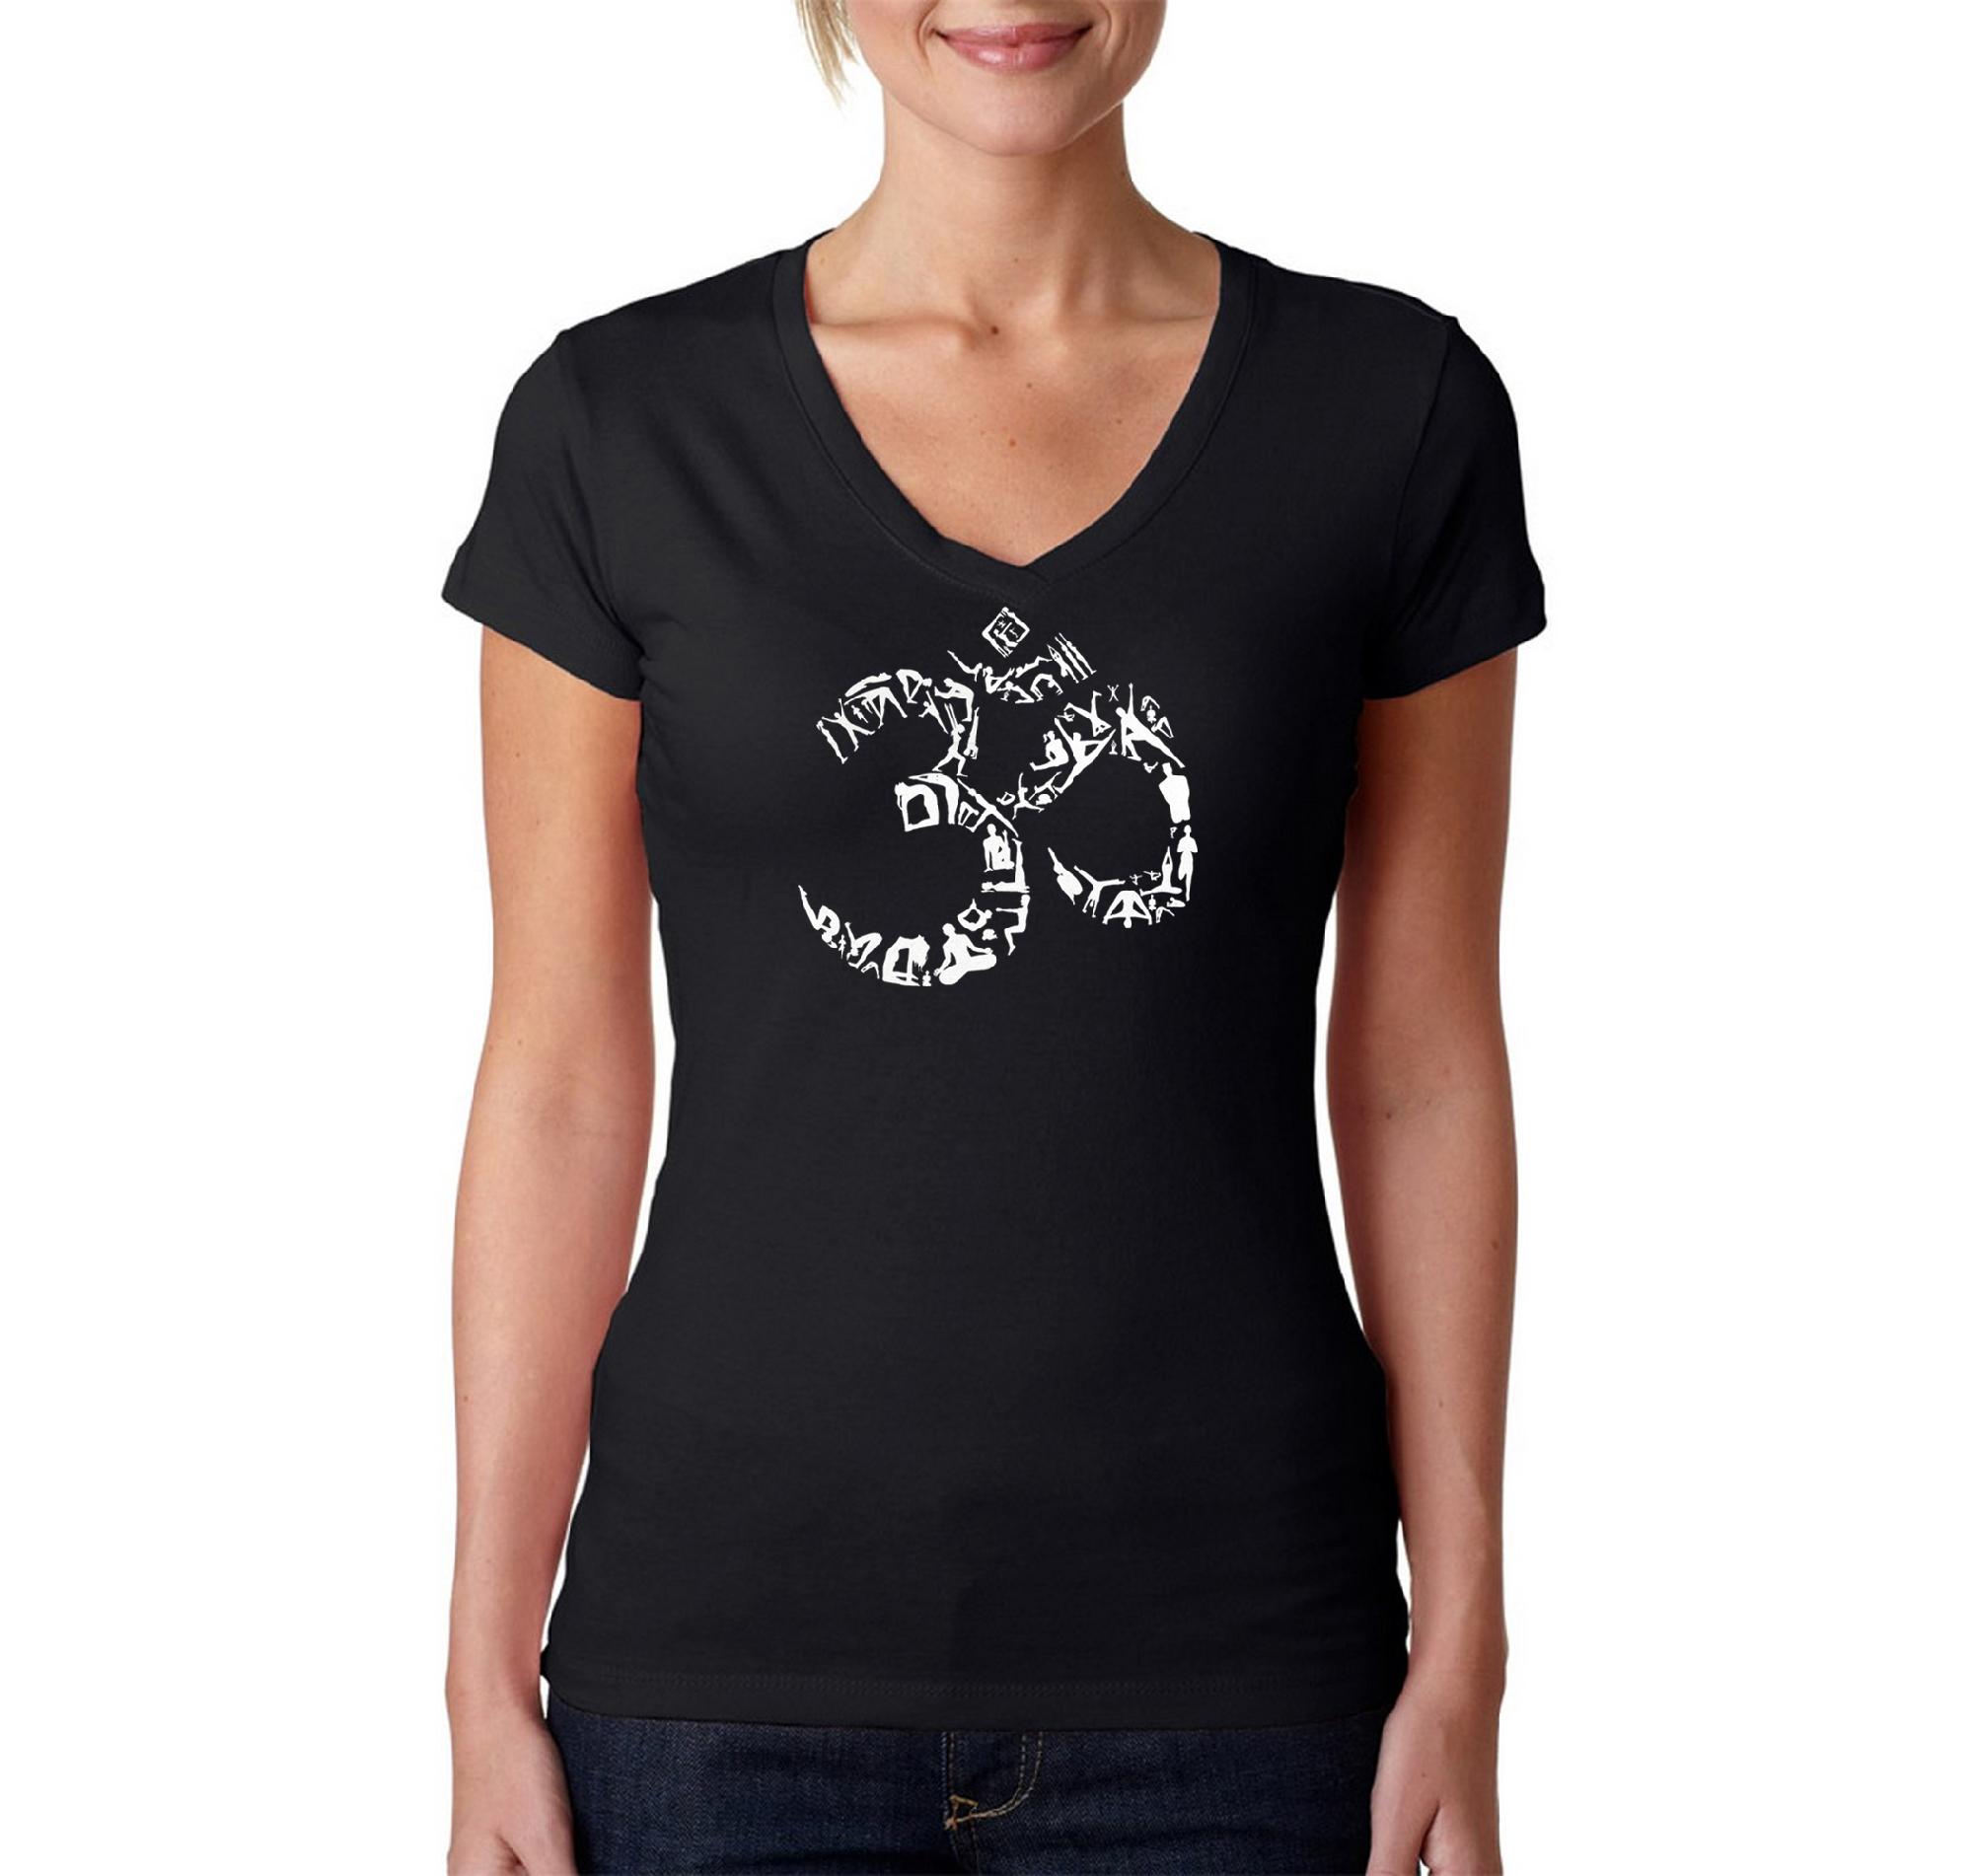 Los Angeles Pop Art Women's Word Art V-Neck T-shirt - The Om Symbol out of Yoga Poses - Online Exclusive